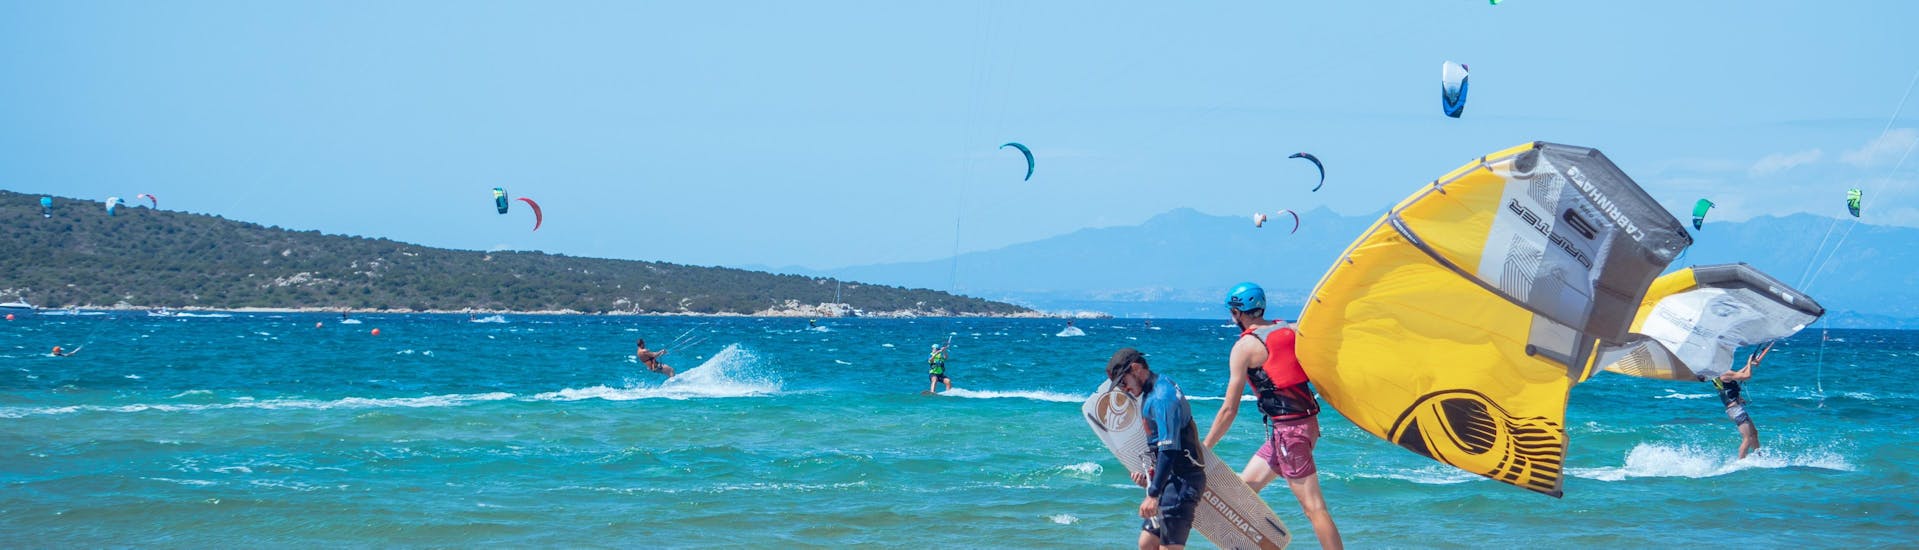 Group Kitesurfing Course - All Levels.